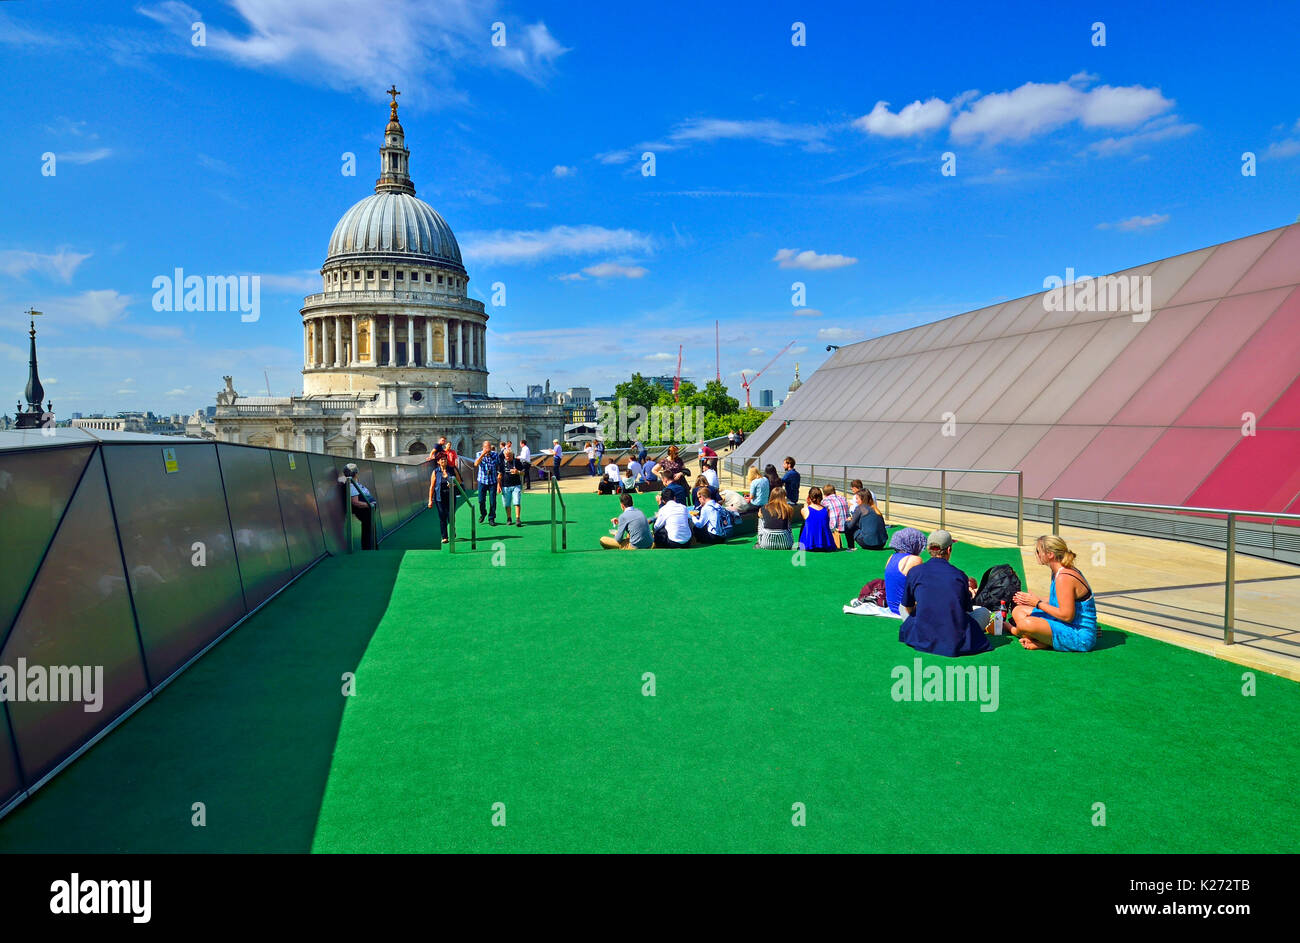 London, England, UK. St Paul's Cathedral seen from the public rooftop terrace of One New Change - people having lunch on a sunny day in August Stock Photo